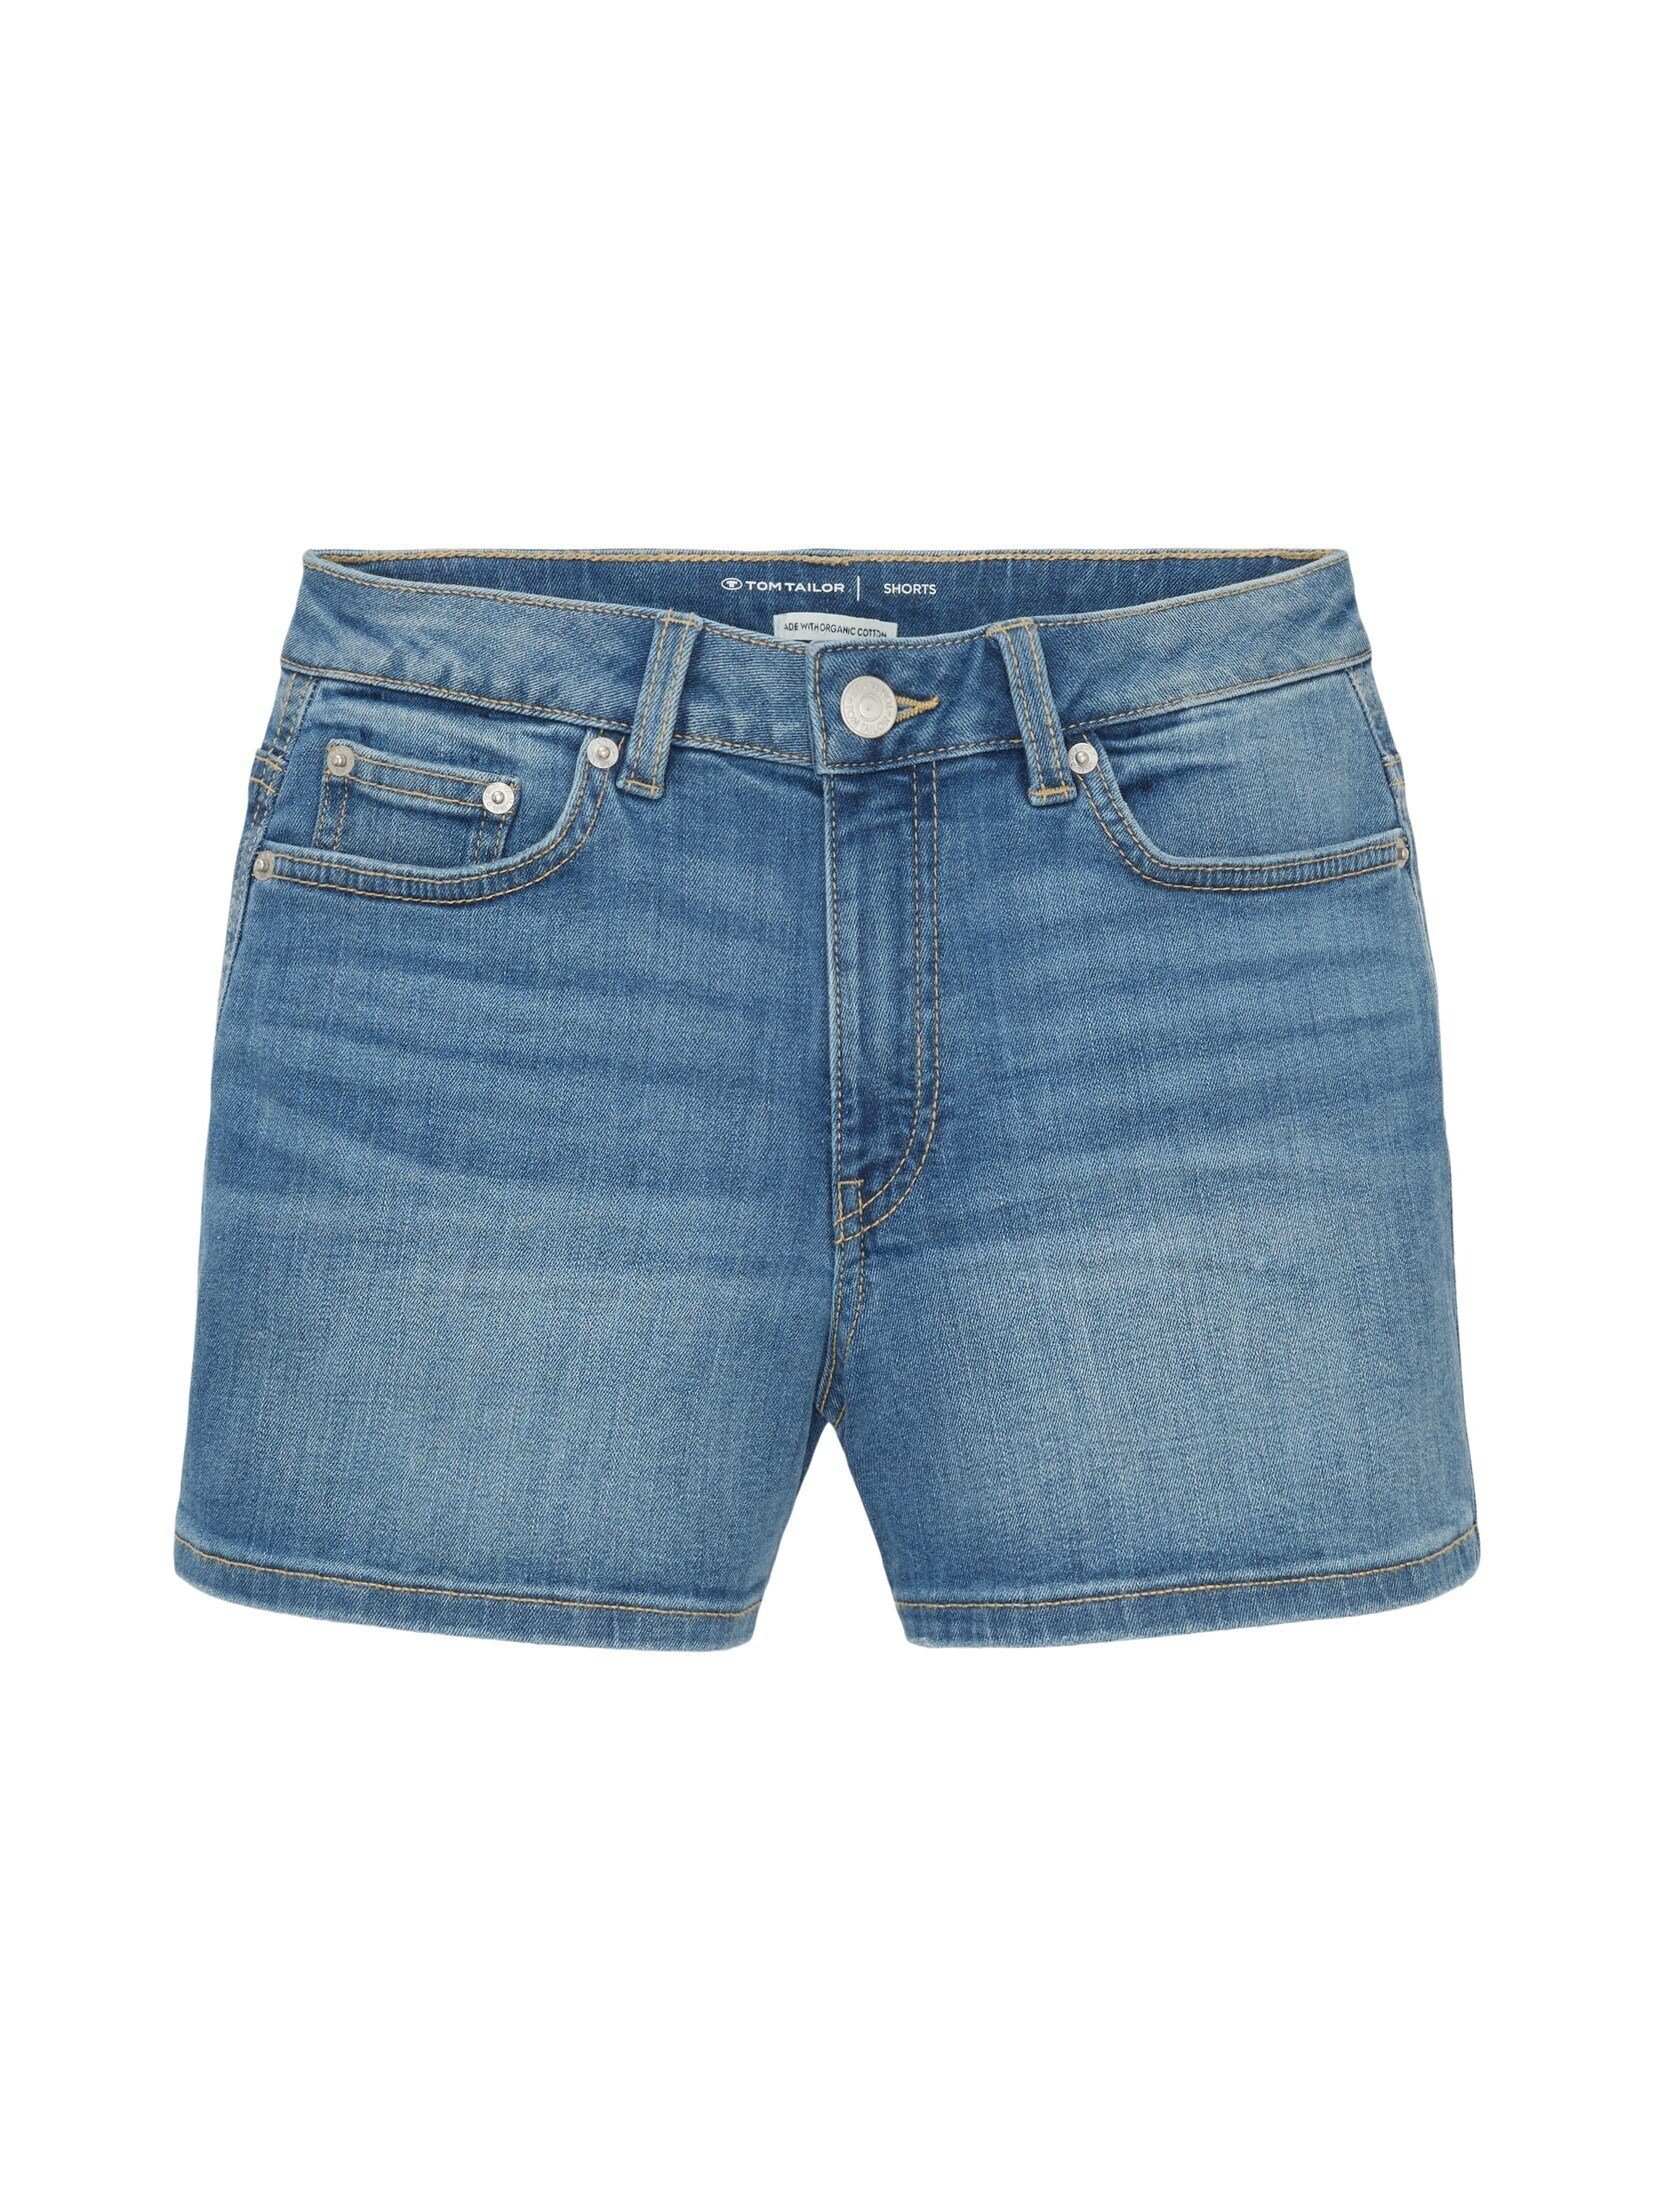 TOM TAILOR Blue Mid leichter Waschung Jeansshorts Denim Used mit Stone Jeansshorts